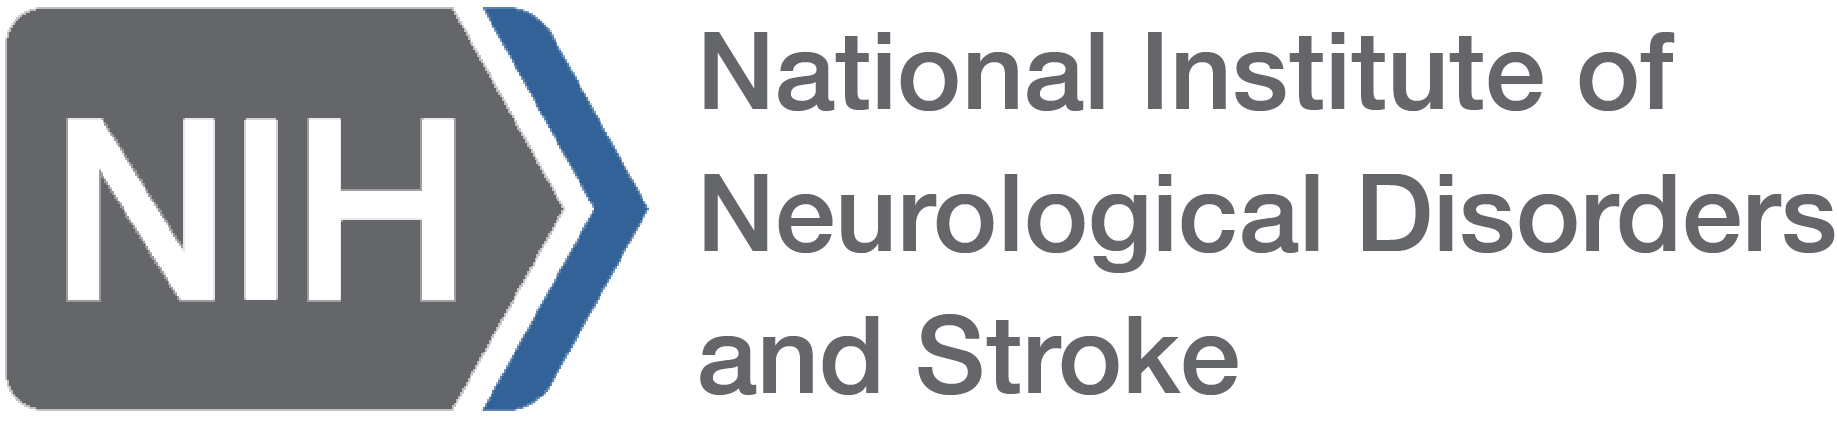 National Institue of Neurological Disorders and Stroke